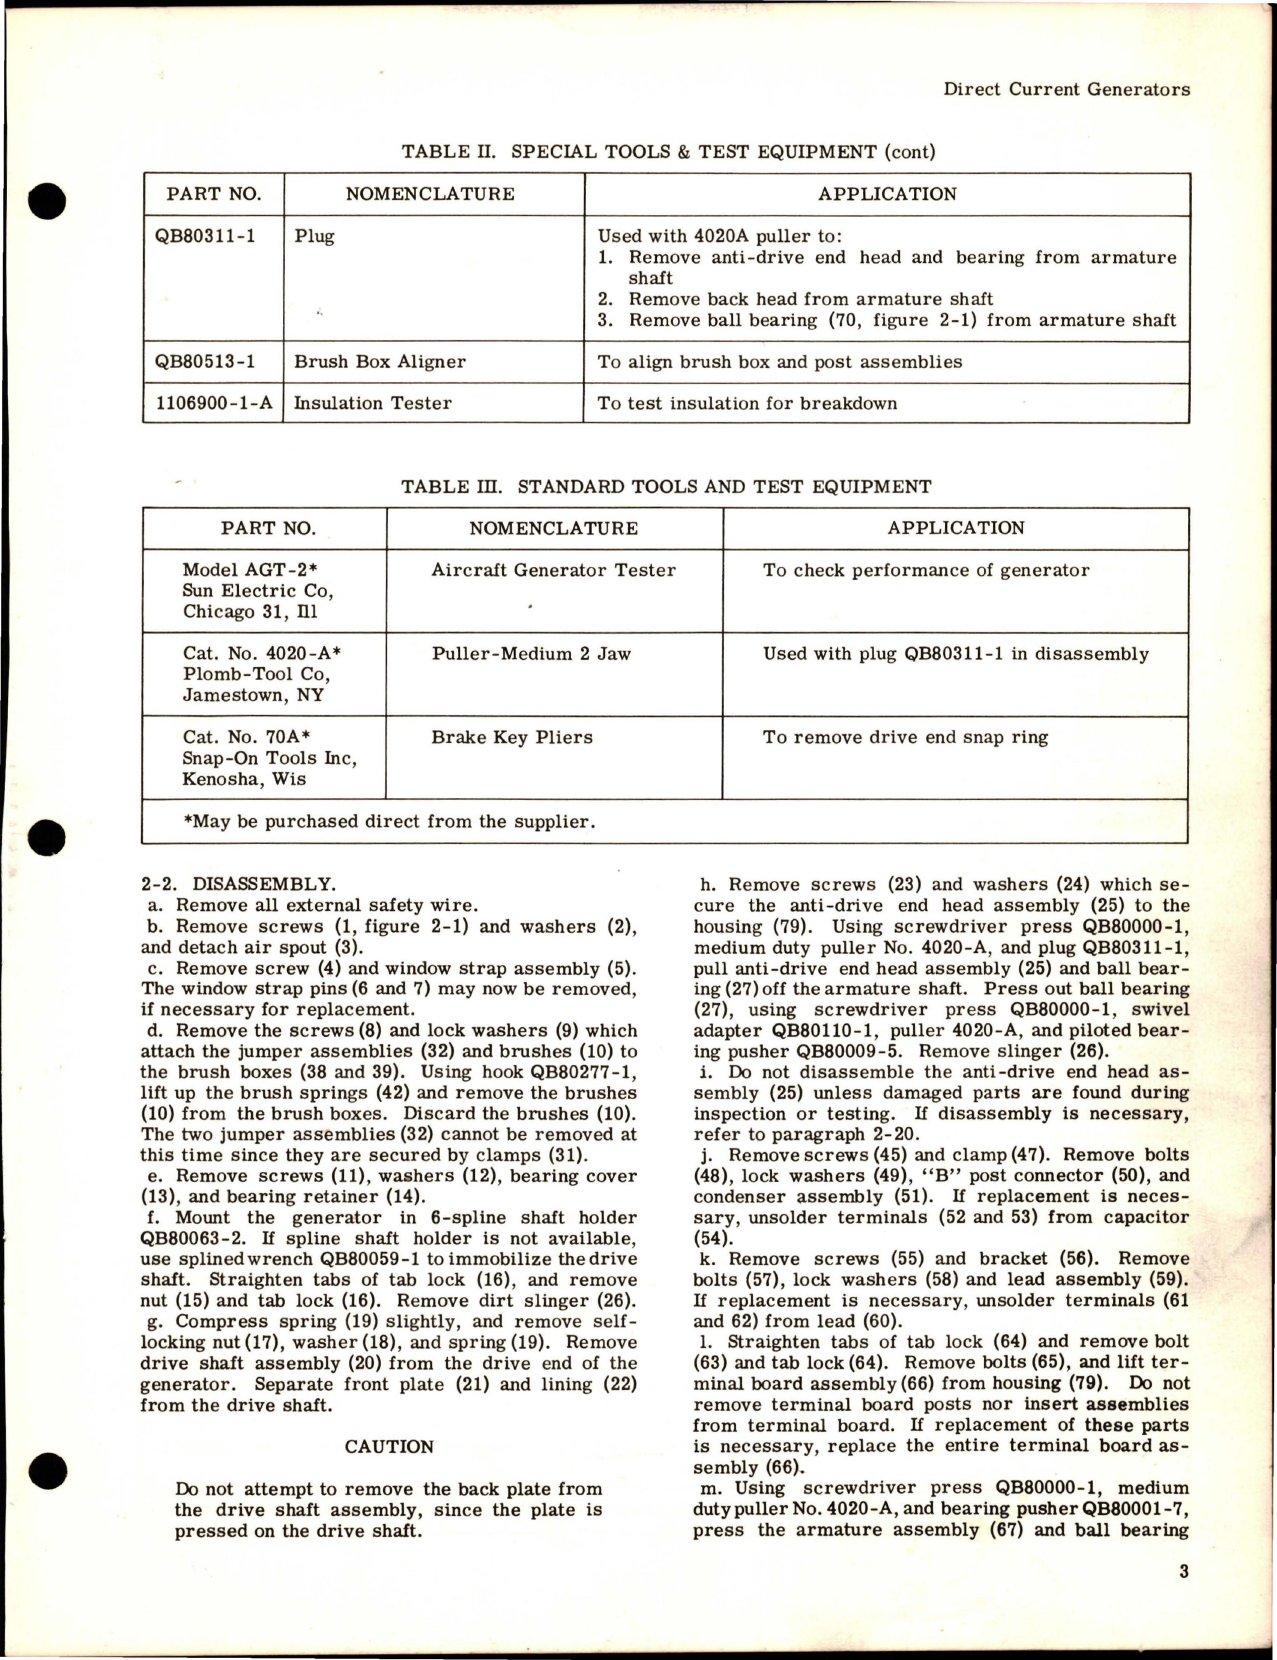 Sample page 9 from AirCorps Library document: Overhaul Instructions for Direct Current Generators 30E16 Series